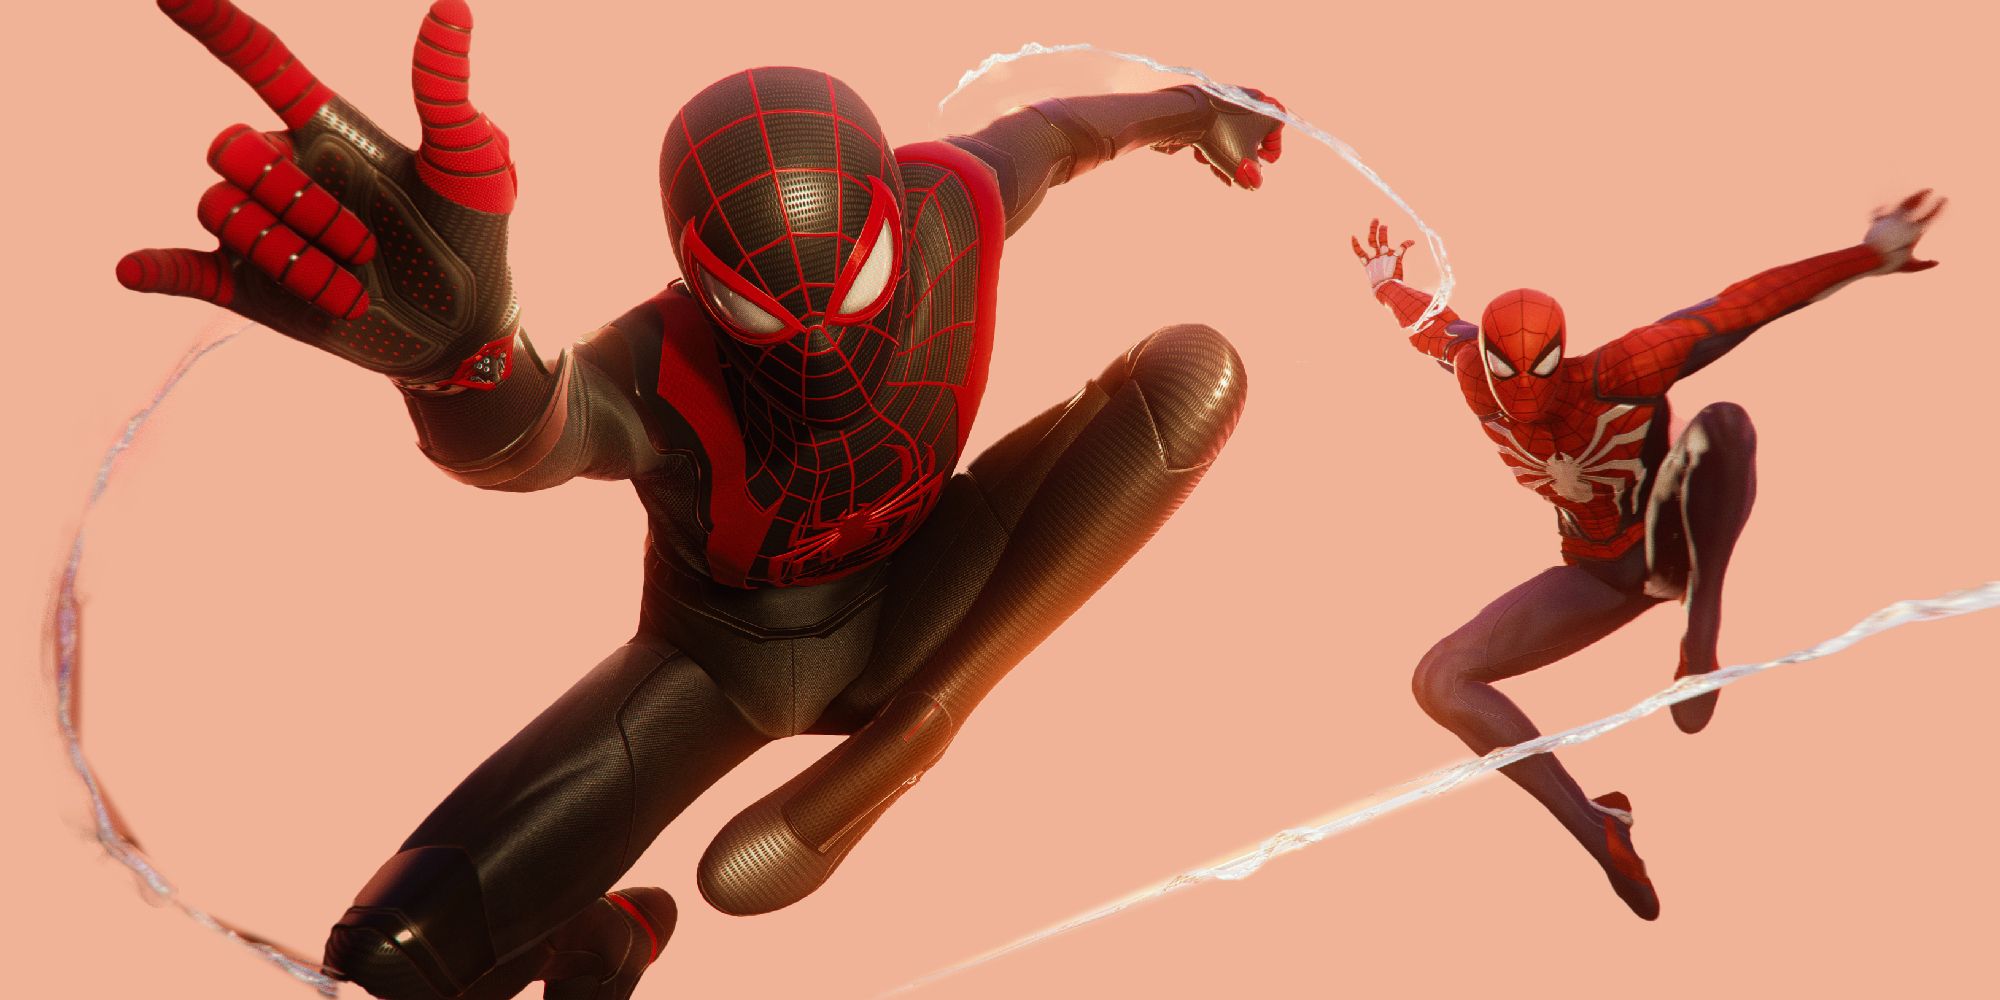 Spider-Men peter parker and miles morales in their suits swinging on webs